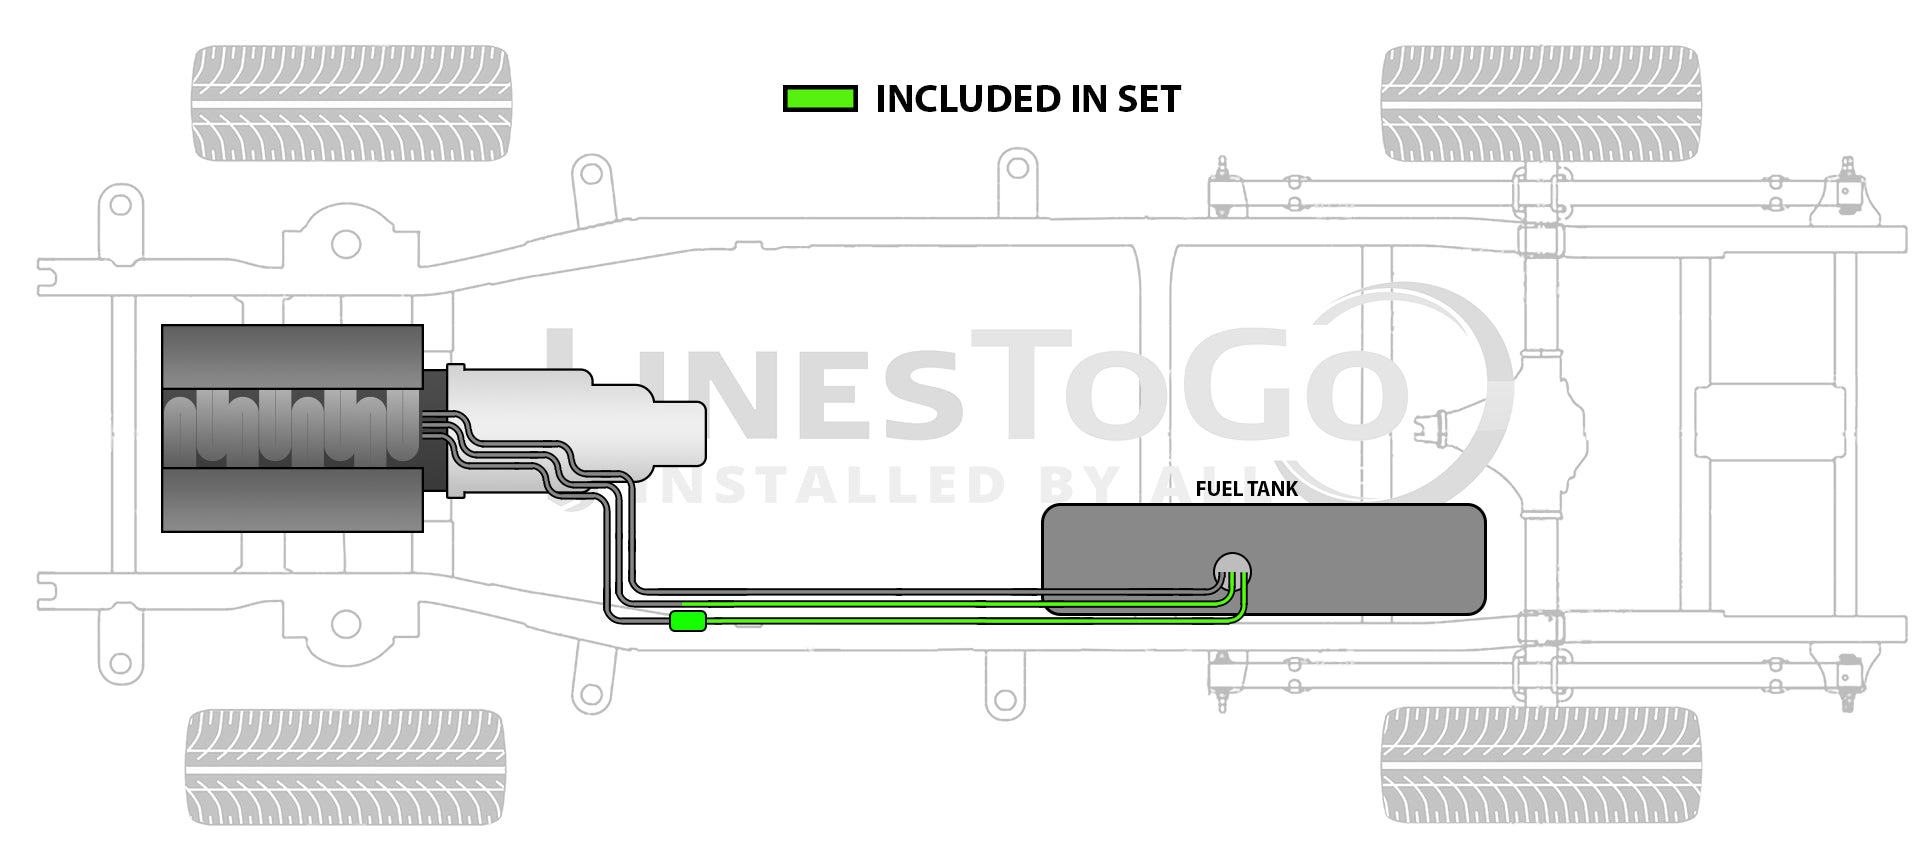 Chevy Truck Rear Fuel Line Set 1993 Reg Cab 6.5 ft Bed 4WD 5.7L Gas SS400-P1Q Stainless Steel